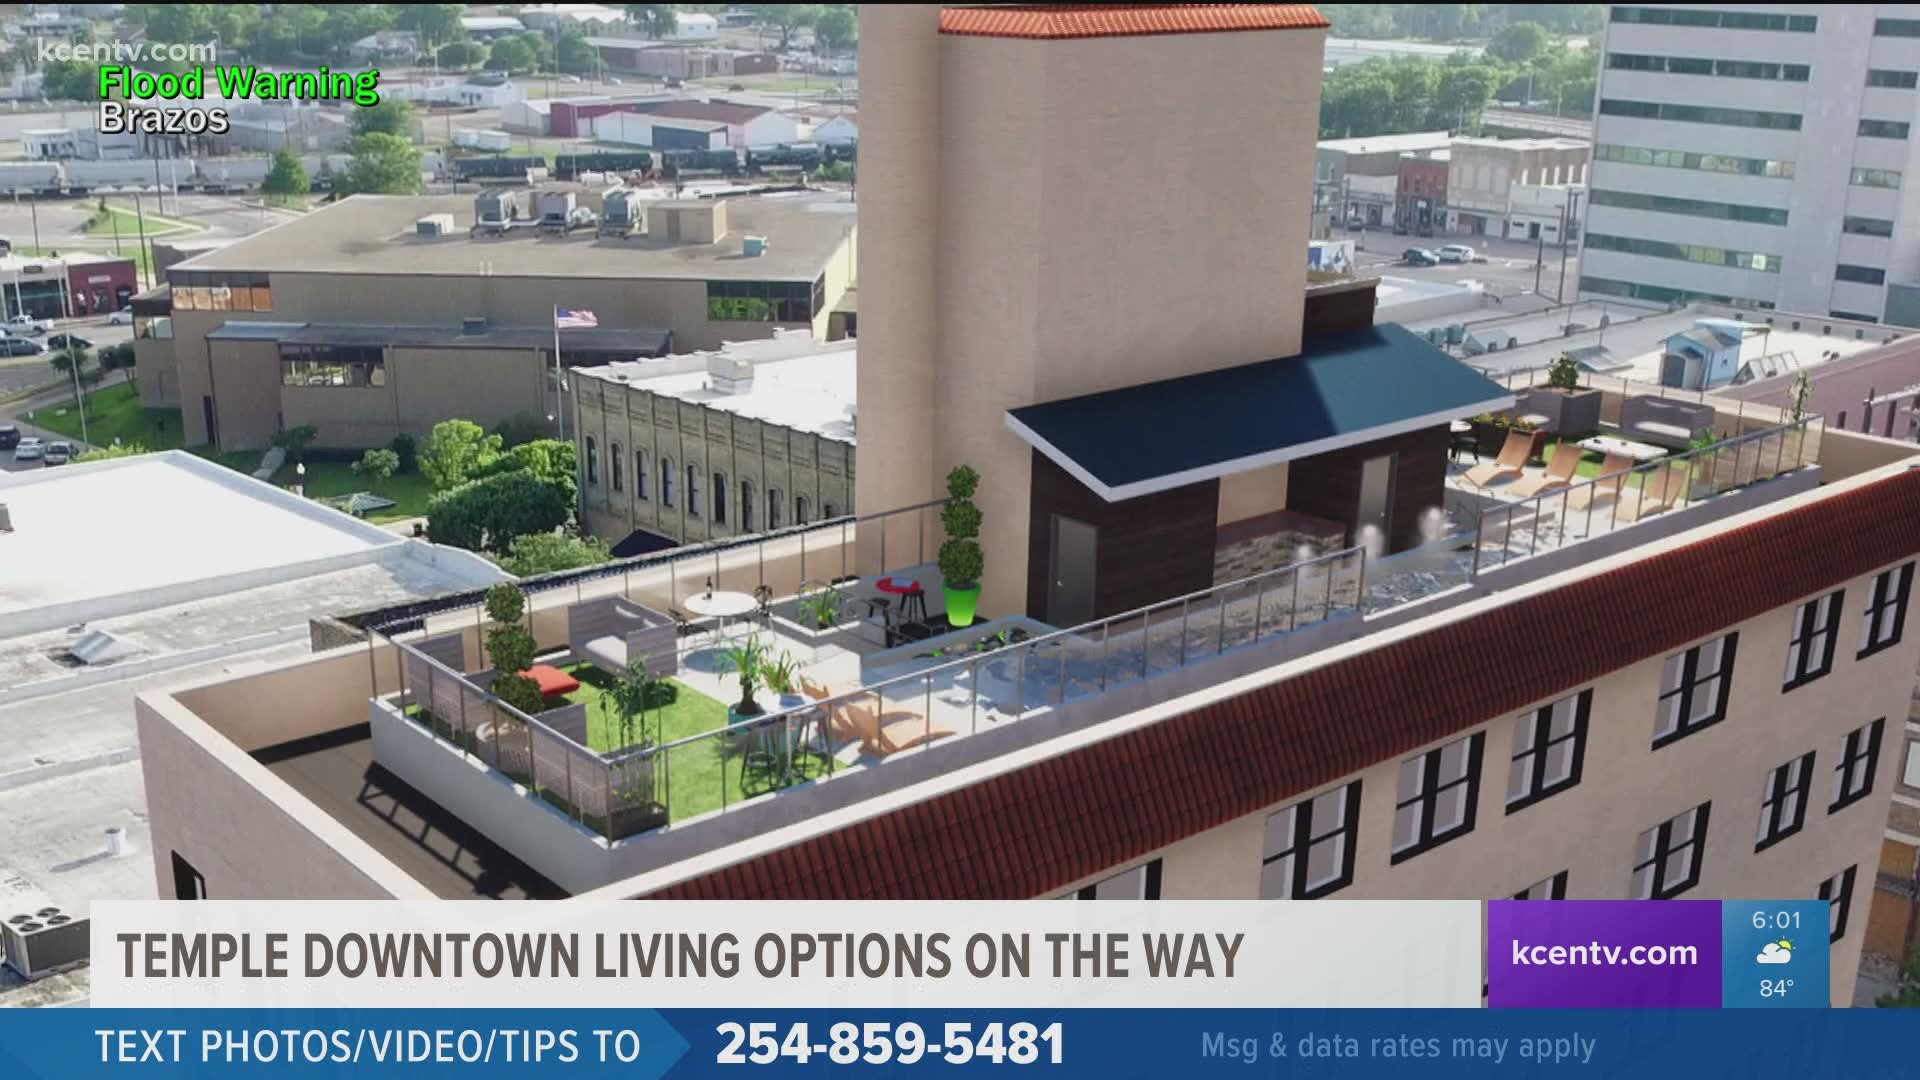 Two large projects are in the works to bring more living spaces to the downtown area.